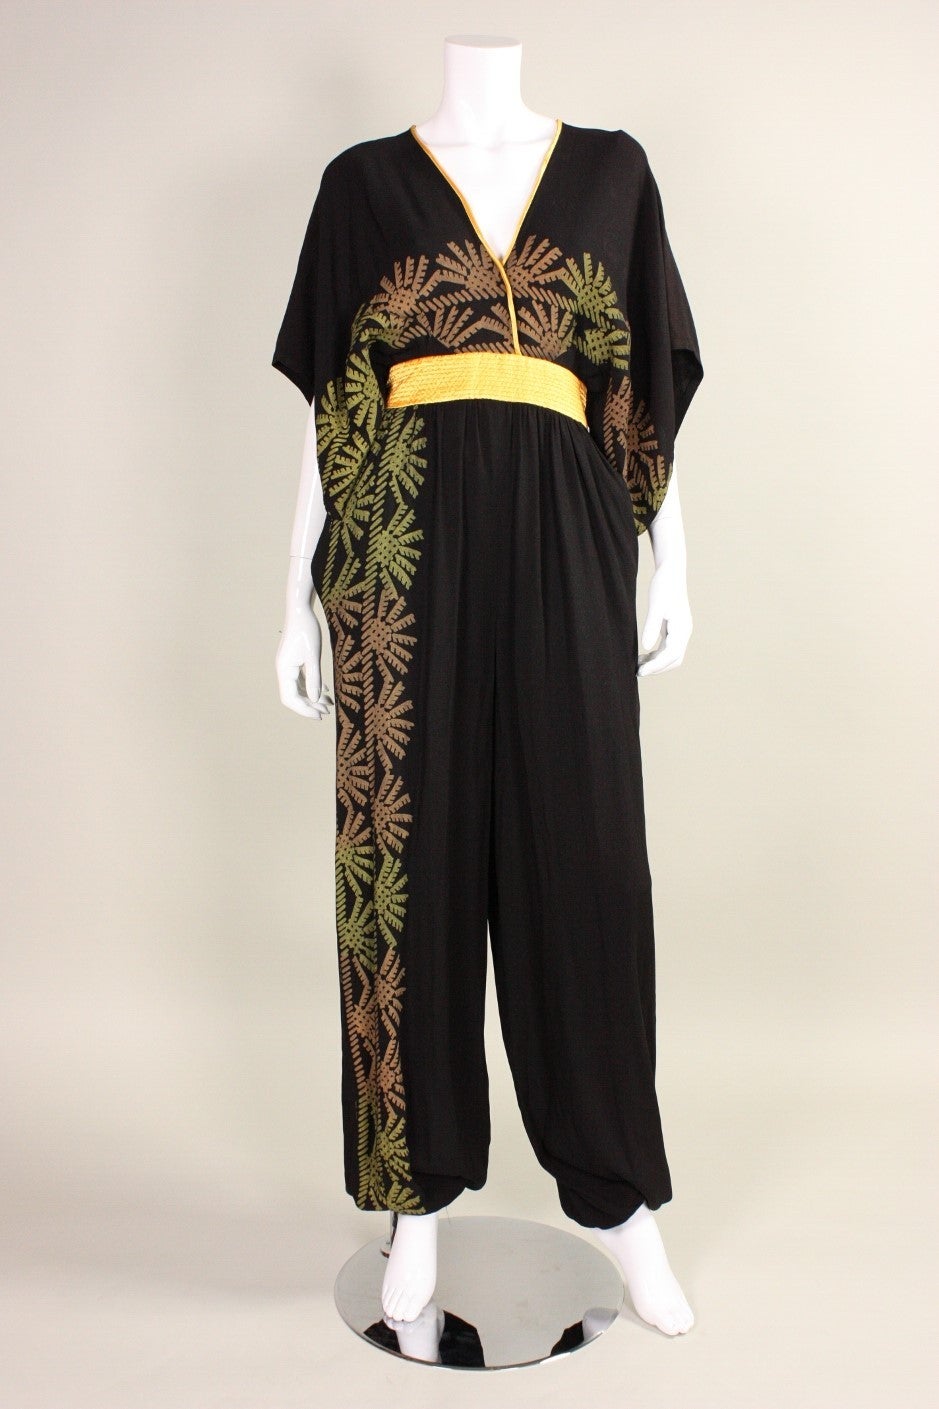 Vintage jumpsuit from Zandra Rhodes dates to the 1980's and retailed at Neiman Marcus.  It is made of black crepe with a geometric hand screen-print in shades of rust orange and yellow.  Marigold satin waistband and piping around neckline. Pant